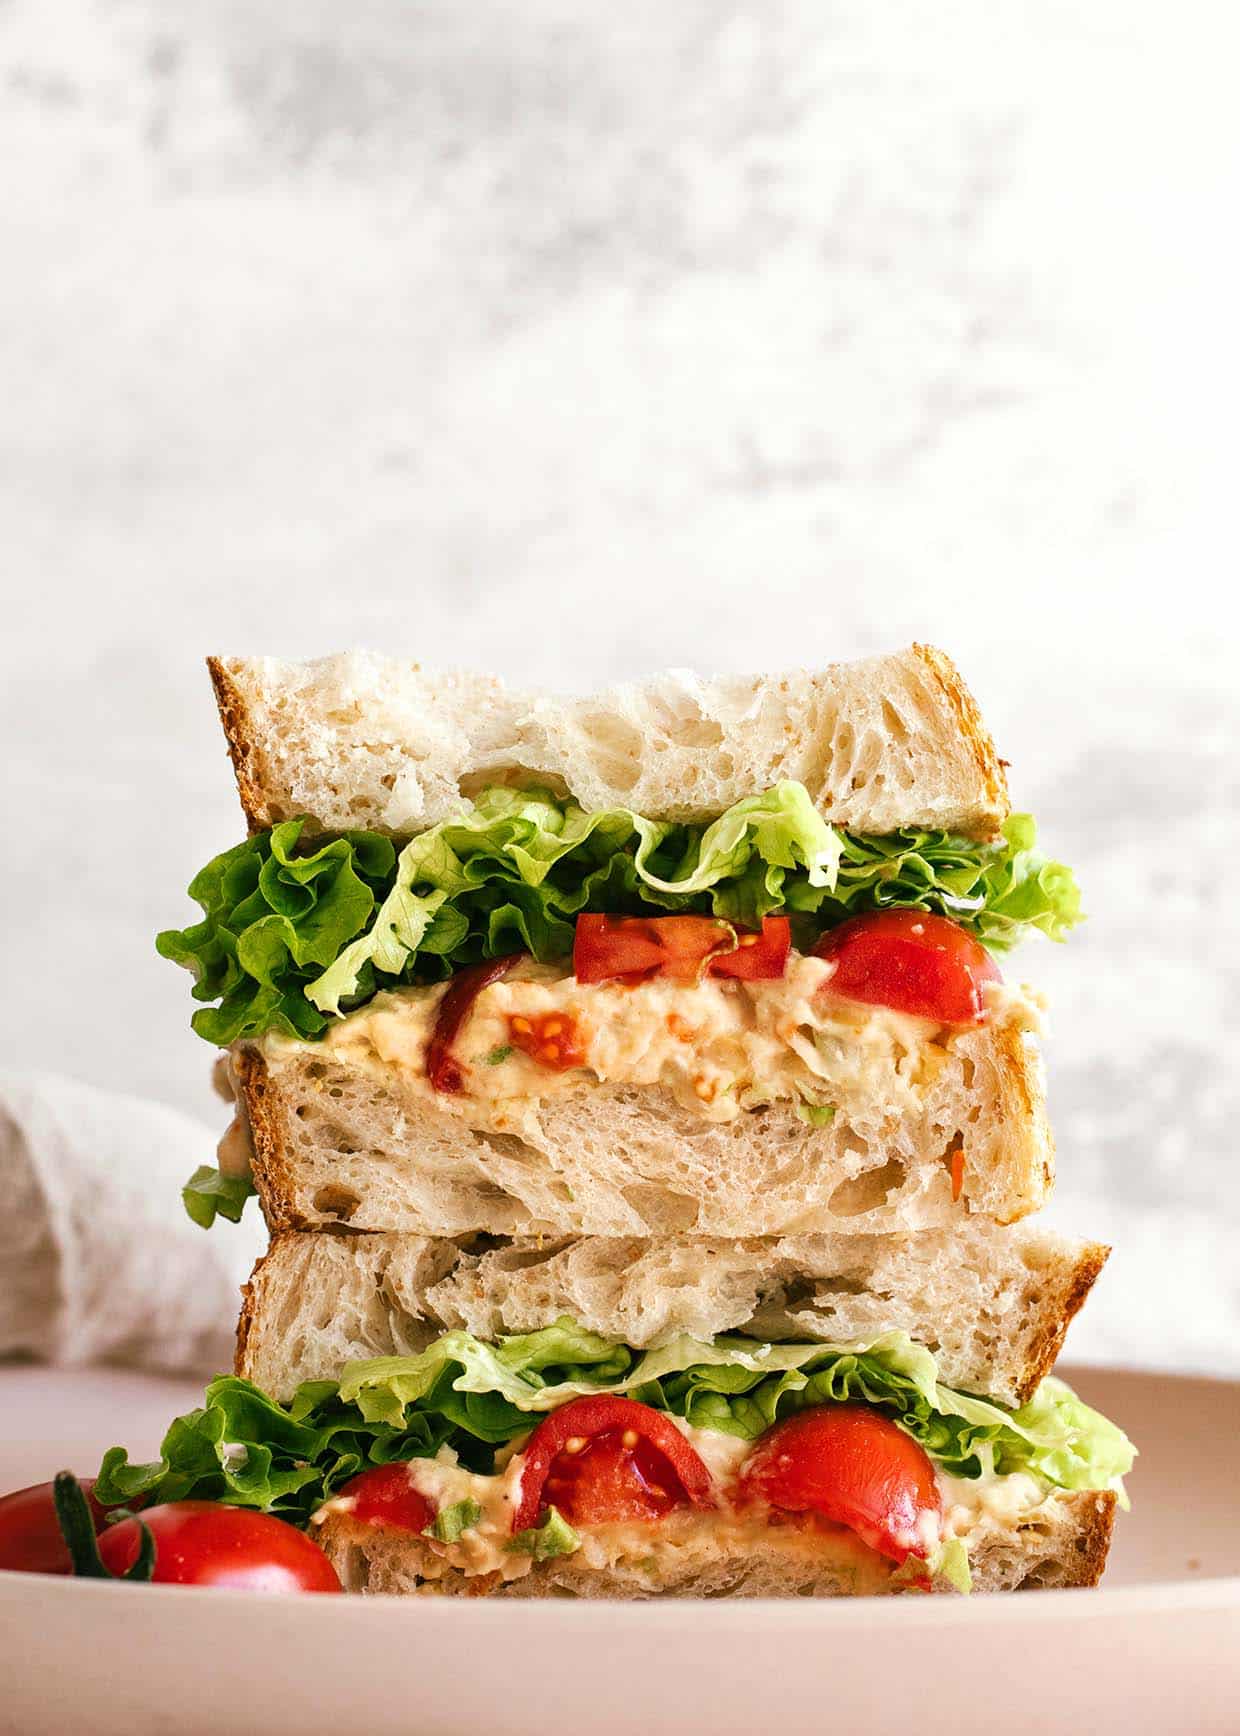 stacked chickpea tuna sandwich with lettuce, tomatoes, bread